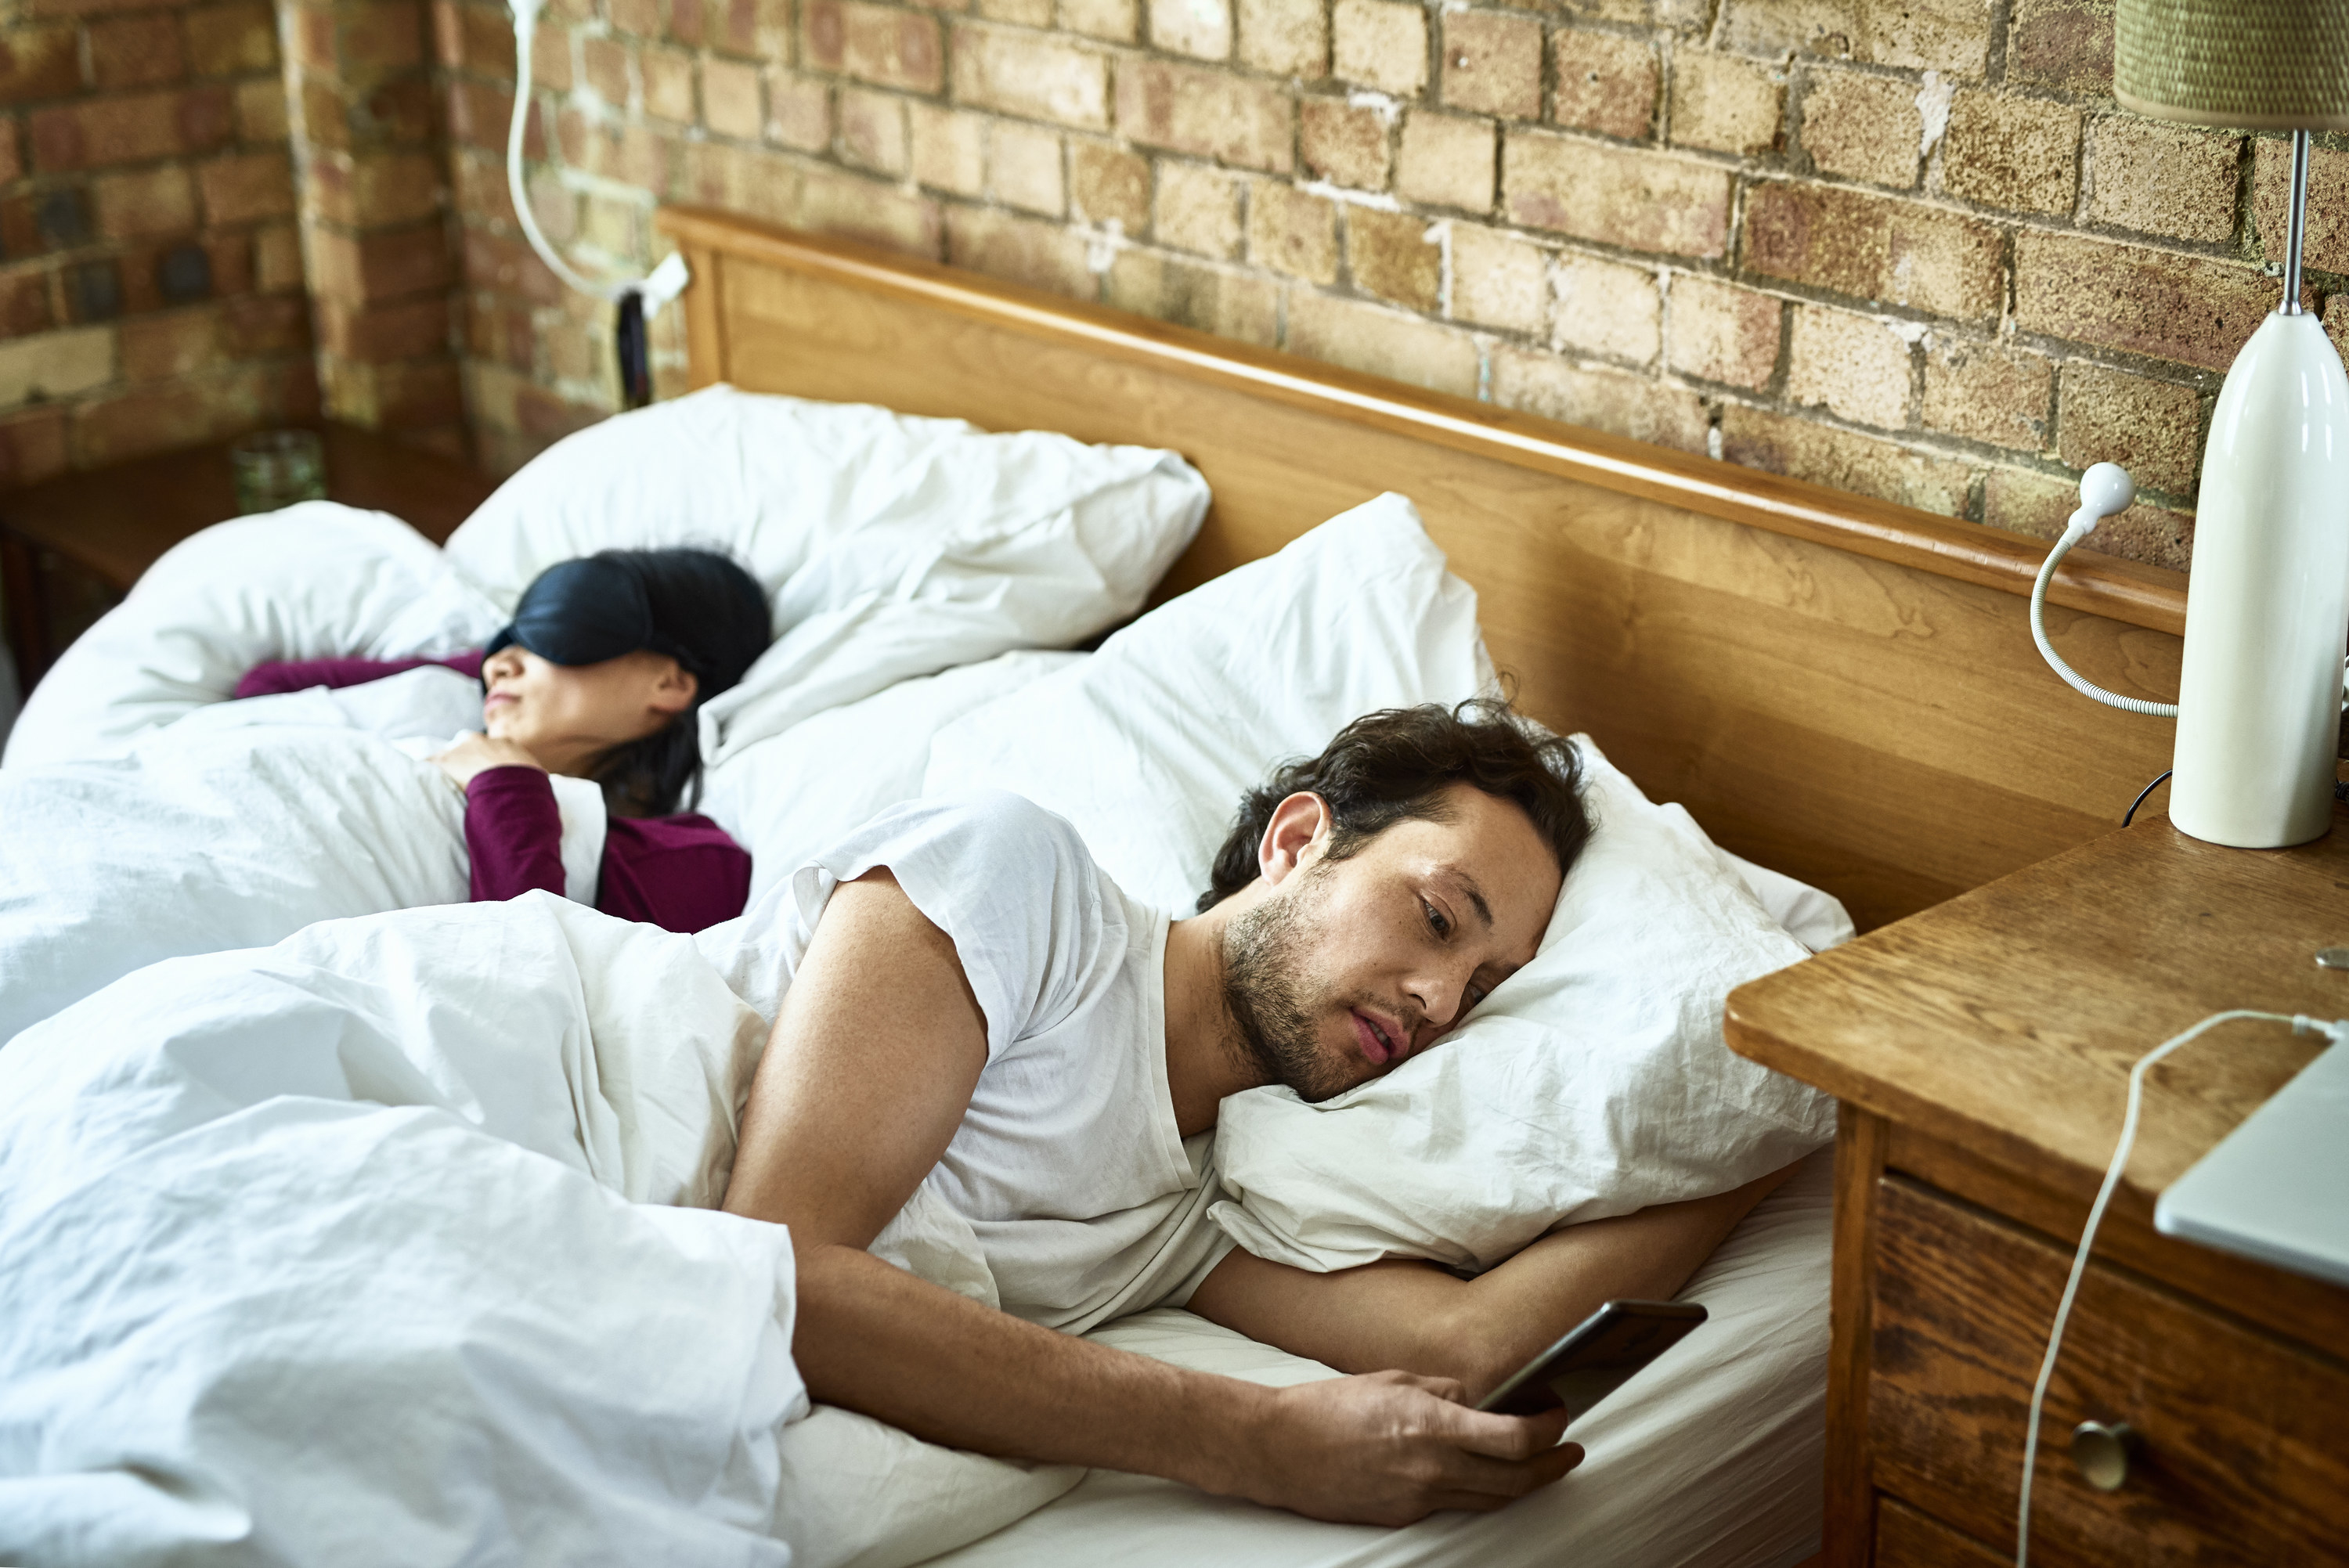 A man looking at his phone and turned away from his sleeping partner in bed